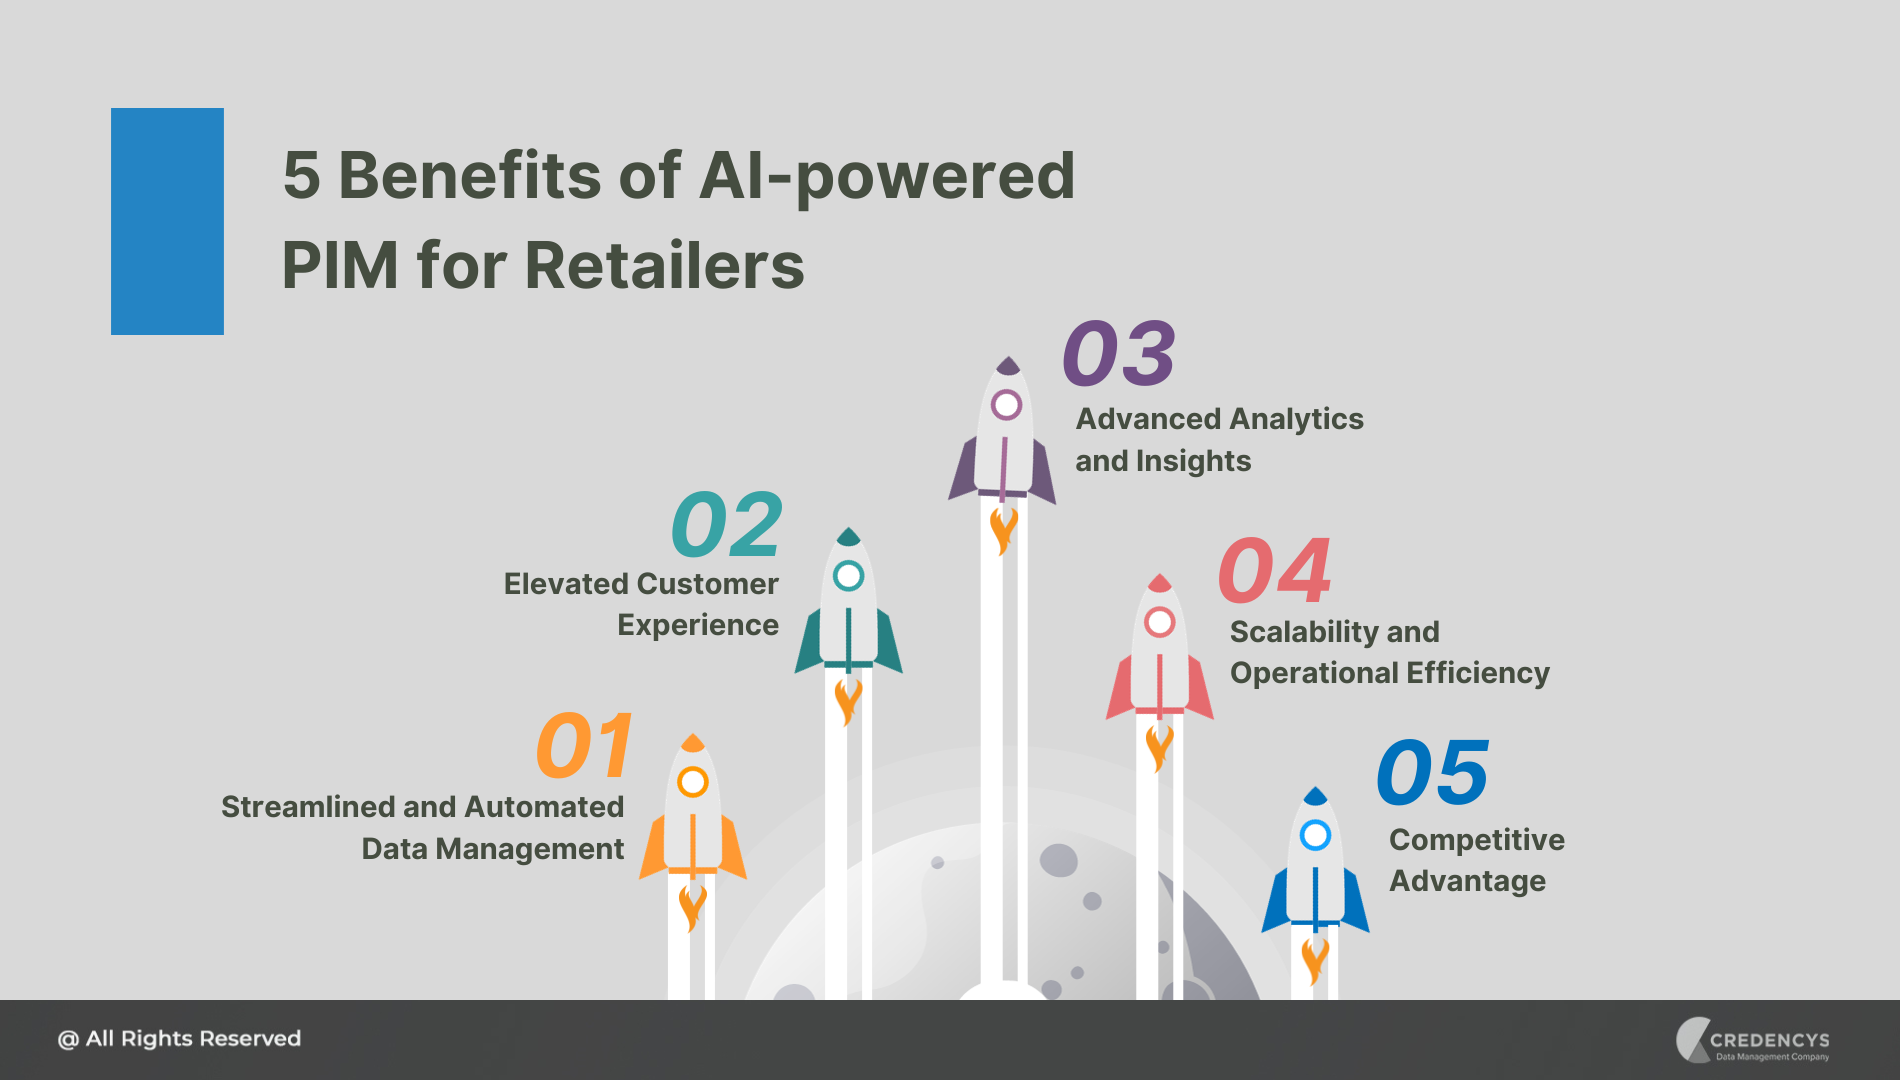 5 Benefits of AI-powered PIM for Retailers